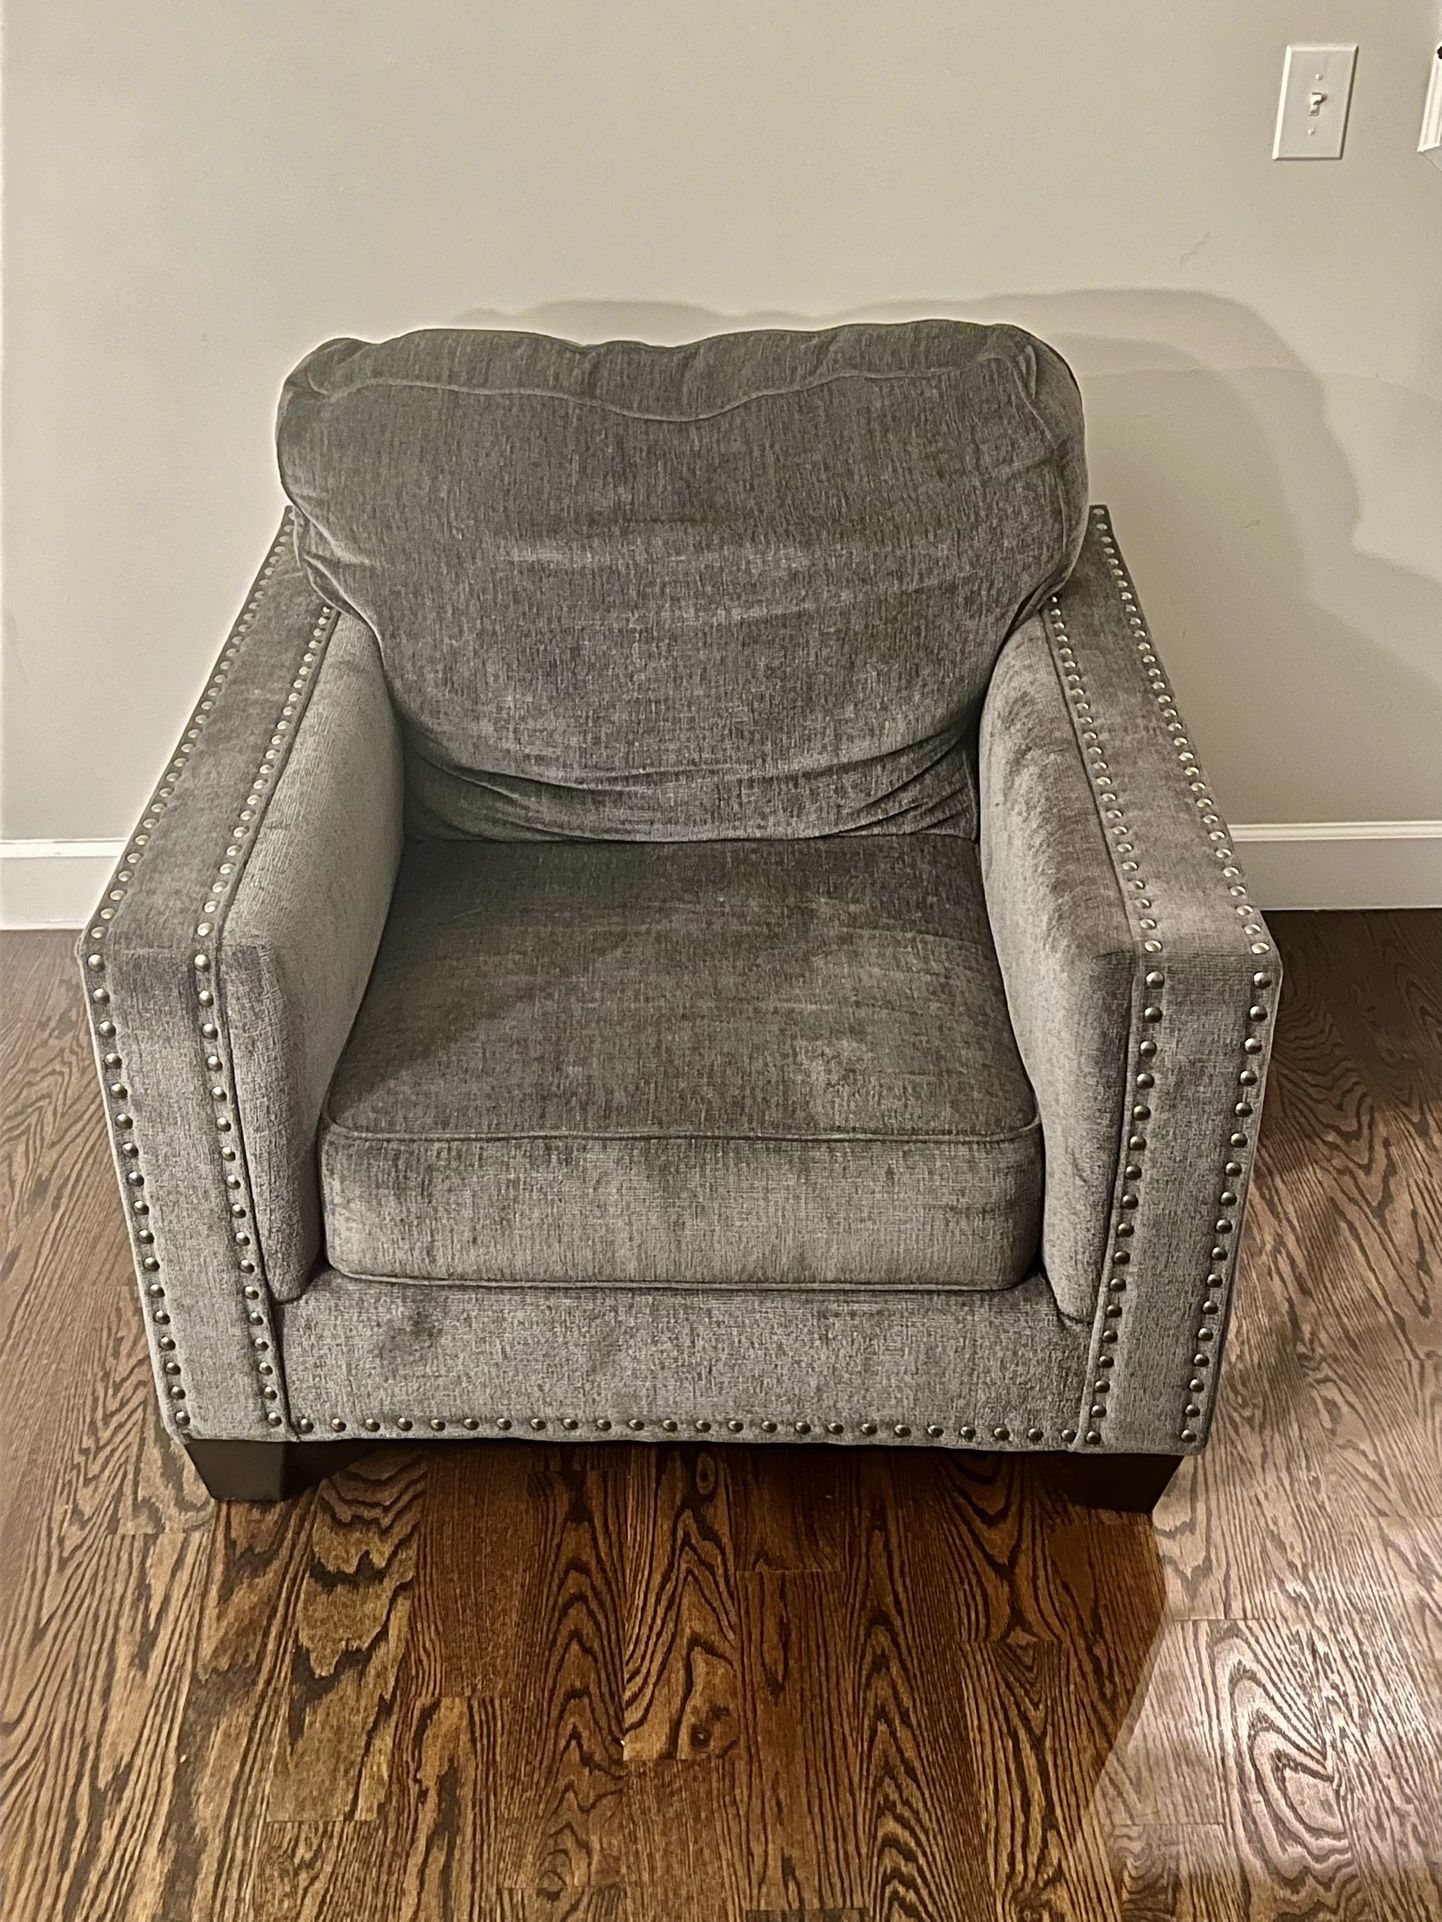 Smoke grey tufted Accent chair 